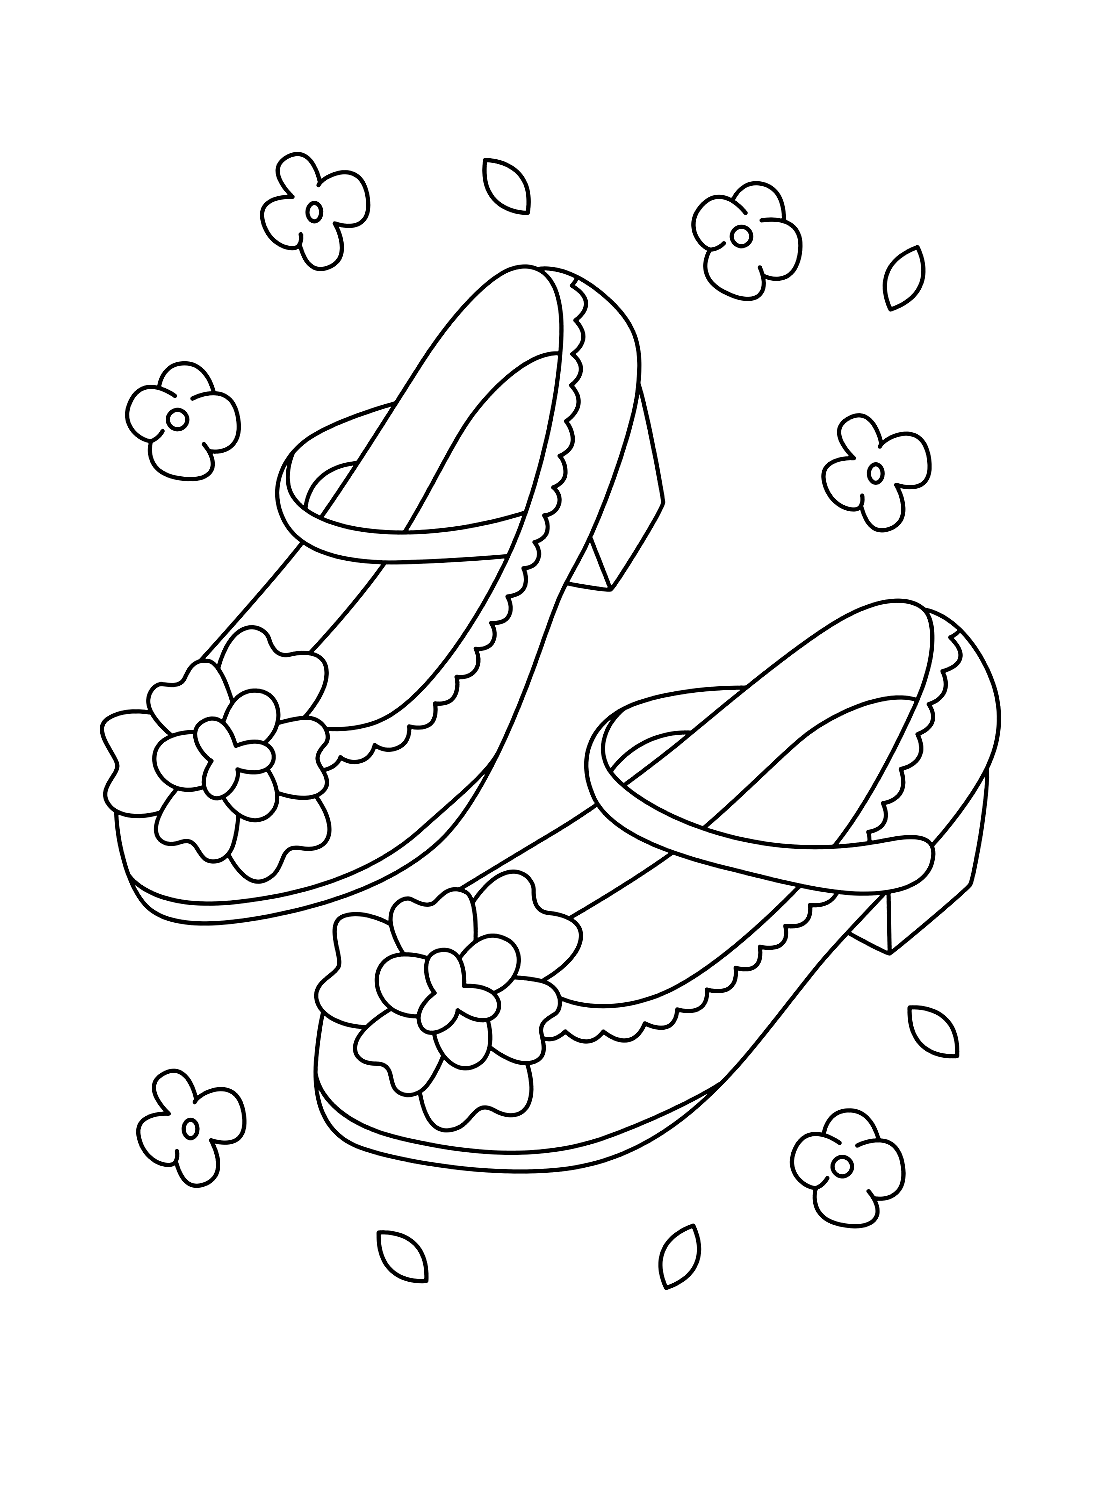 Baby shoes coloring picture